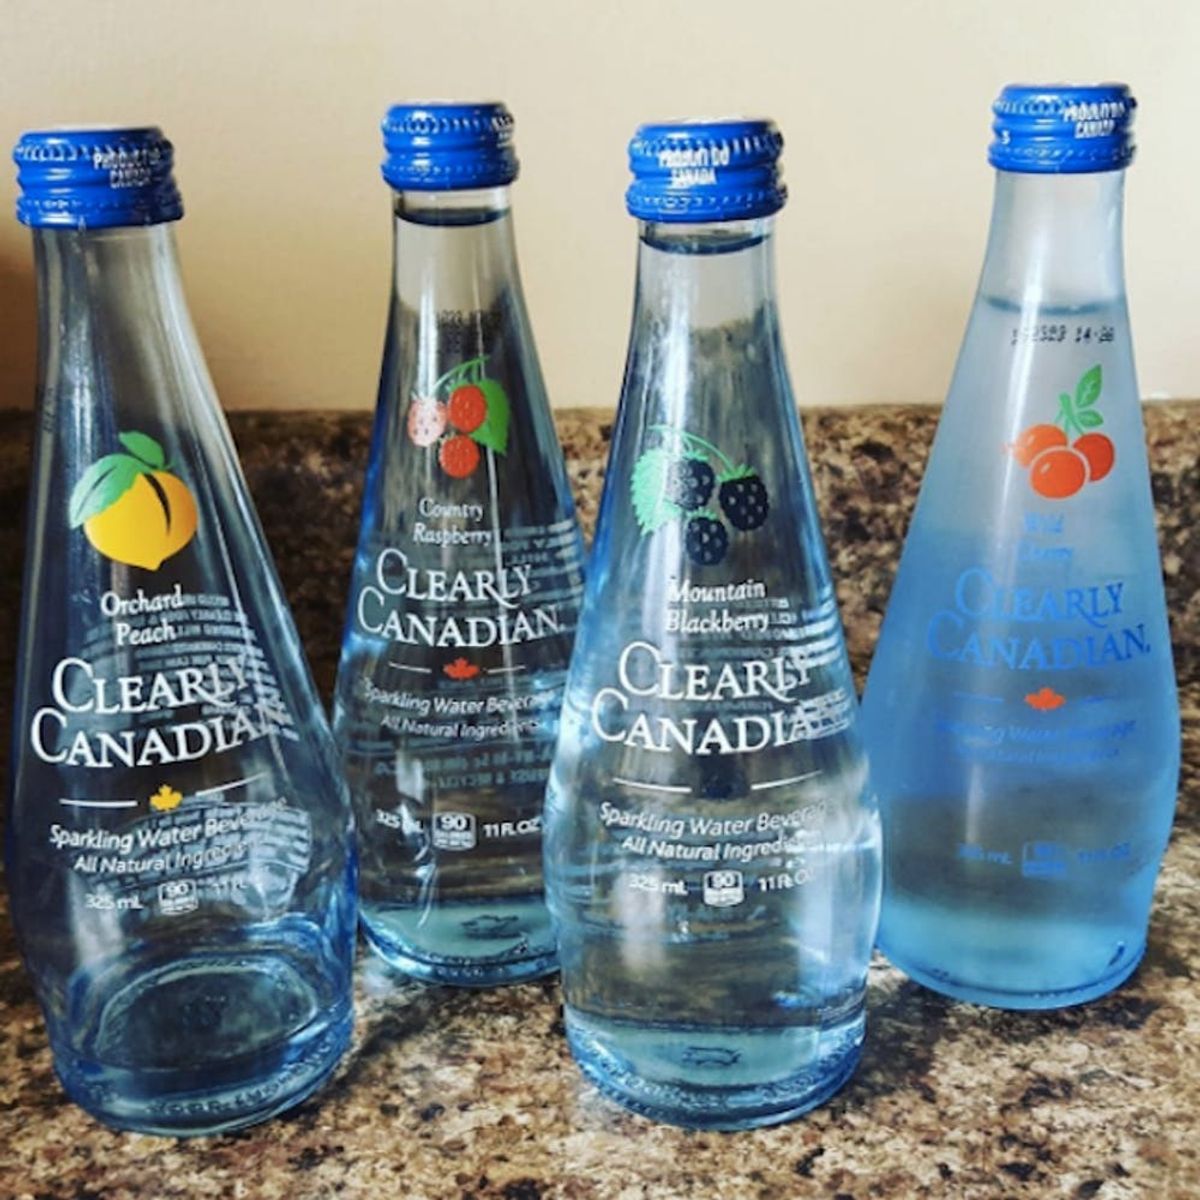 four glass bottles of Clearly Canadian including orchard peach, country raspberry, mountain blackberry and wild cherry